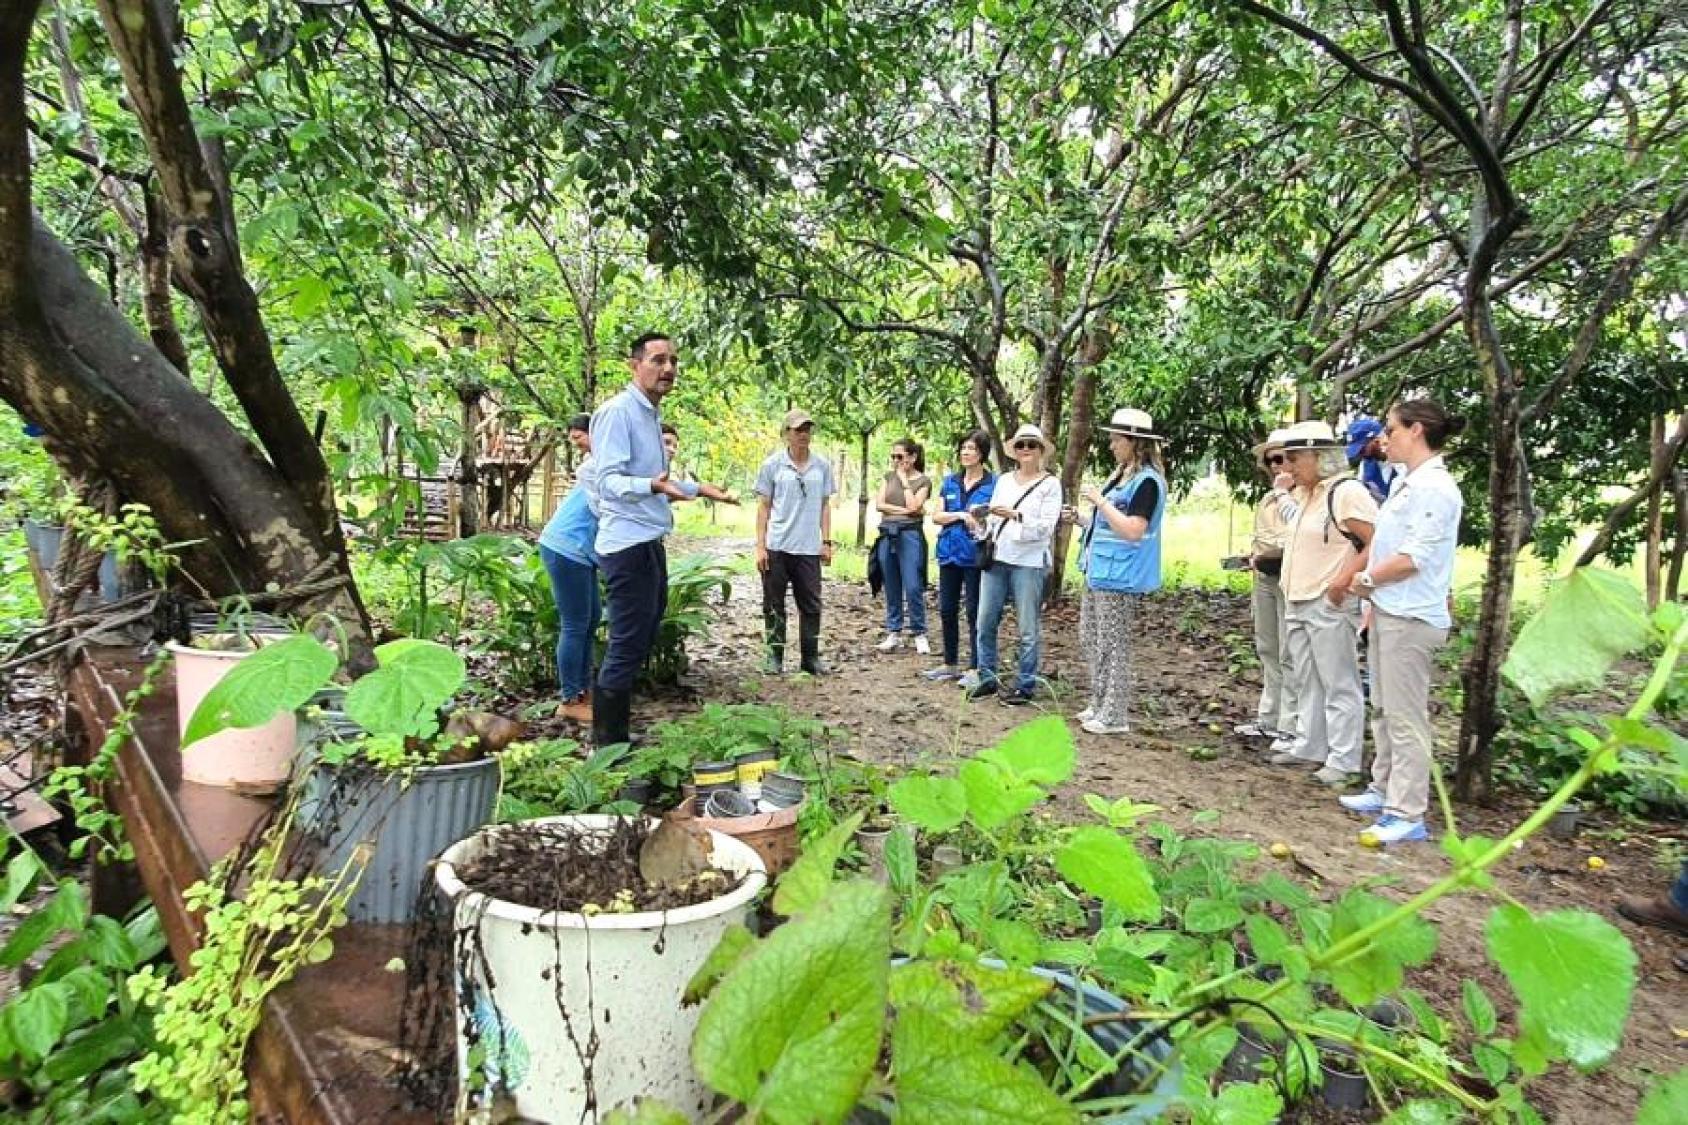 In a green farm, a group of people gather and listen to a farmer in a blue shirt pointing to plants